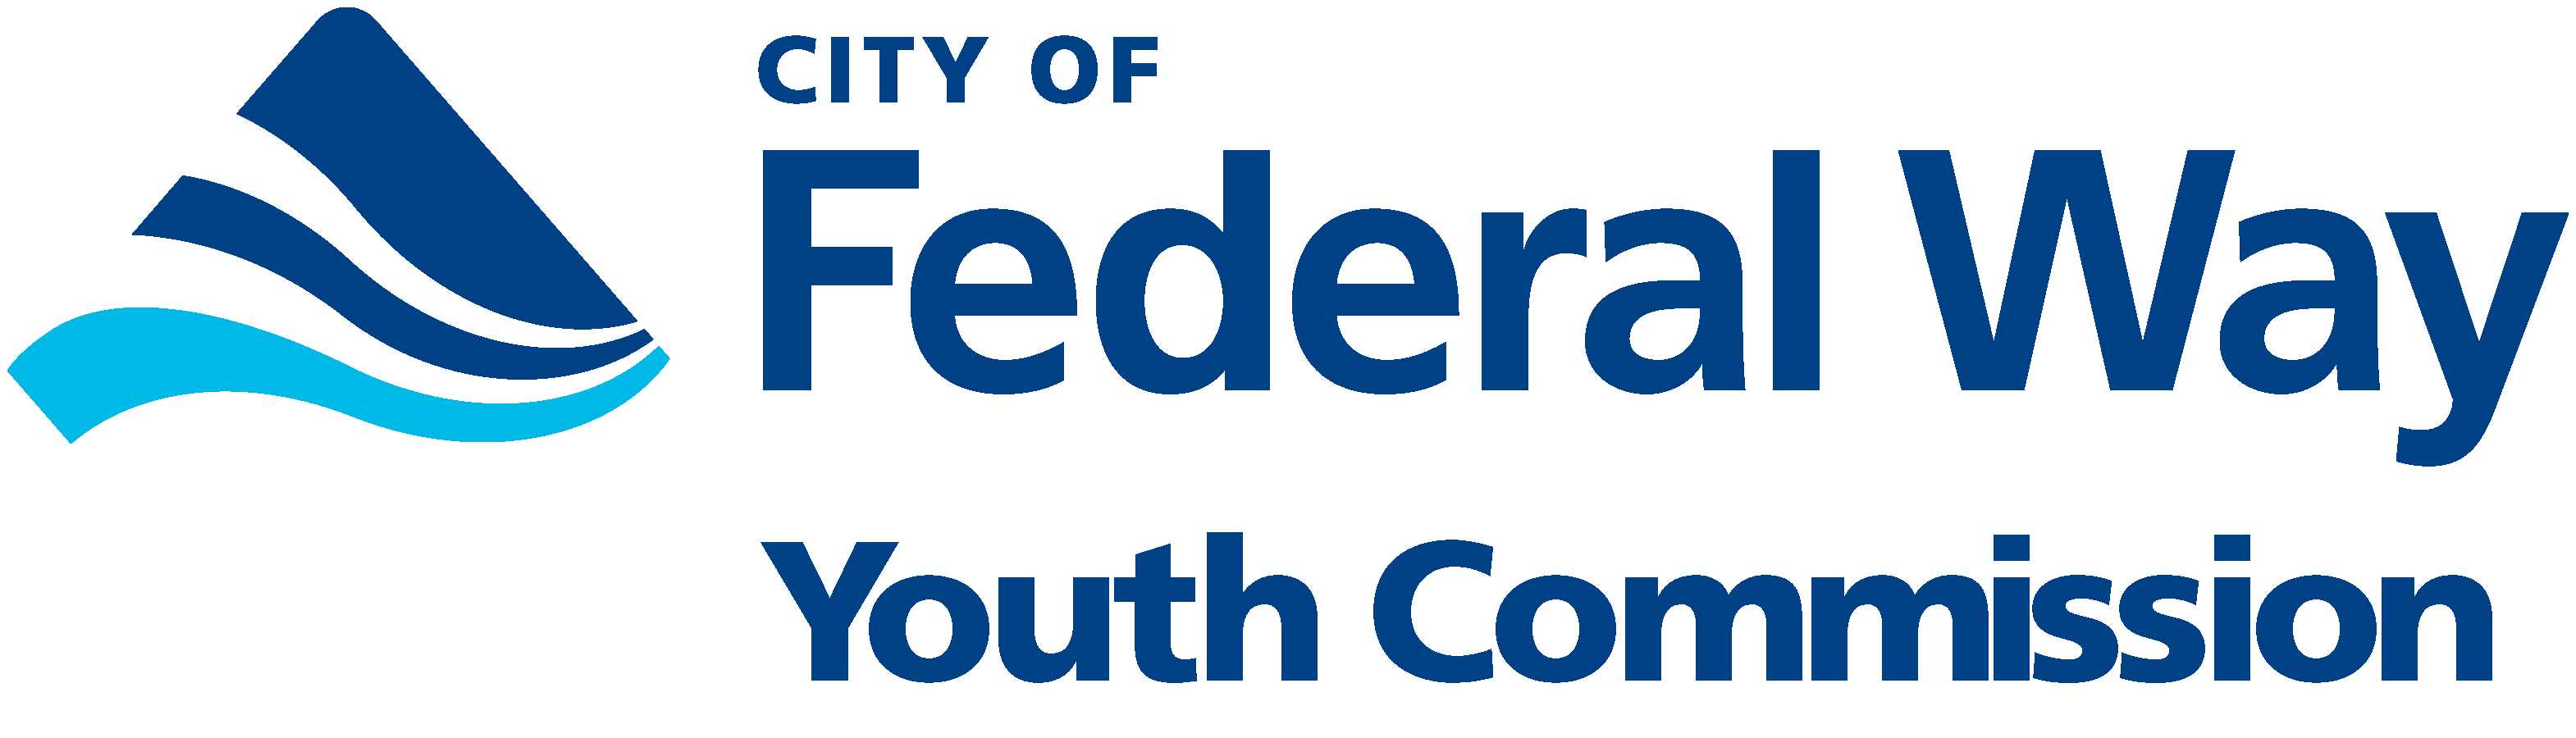 Federal Way Youth Commission Logo